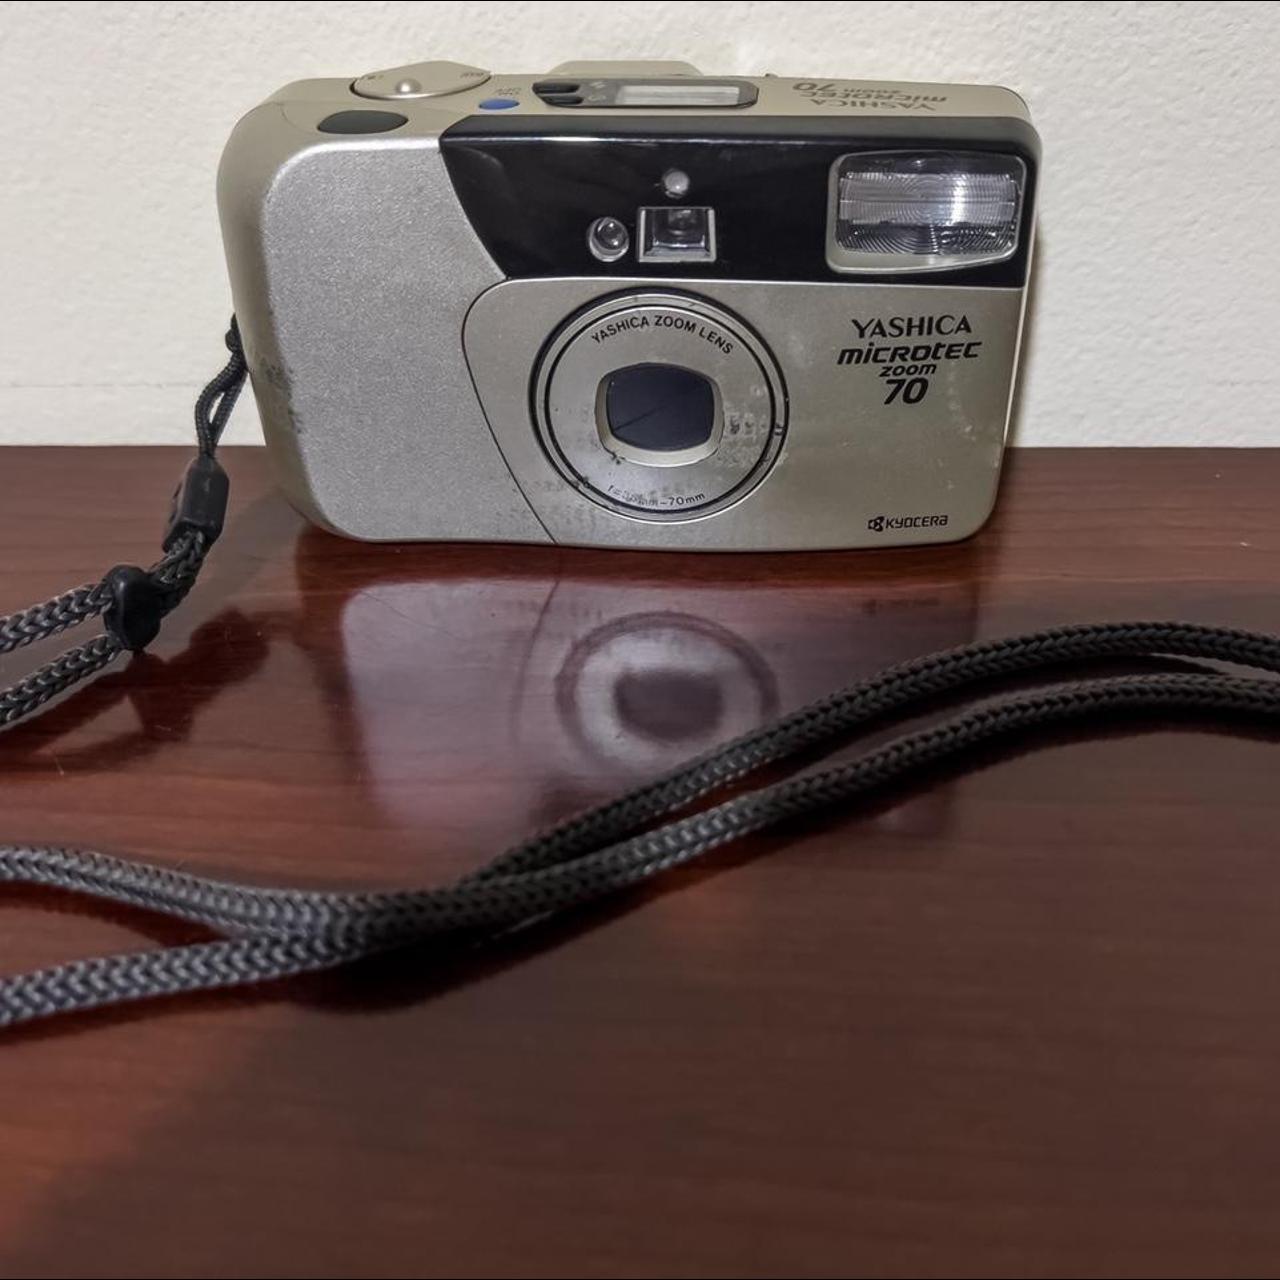 Product Image 1 - Yashica microtech zoom 70
Working tested